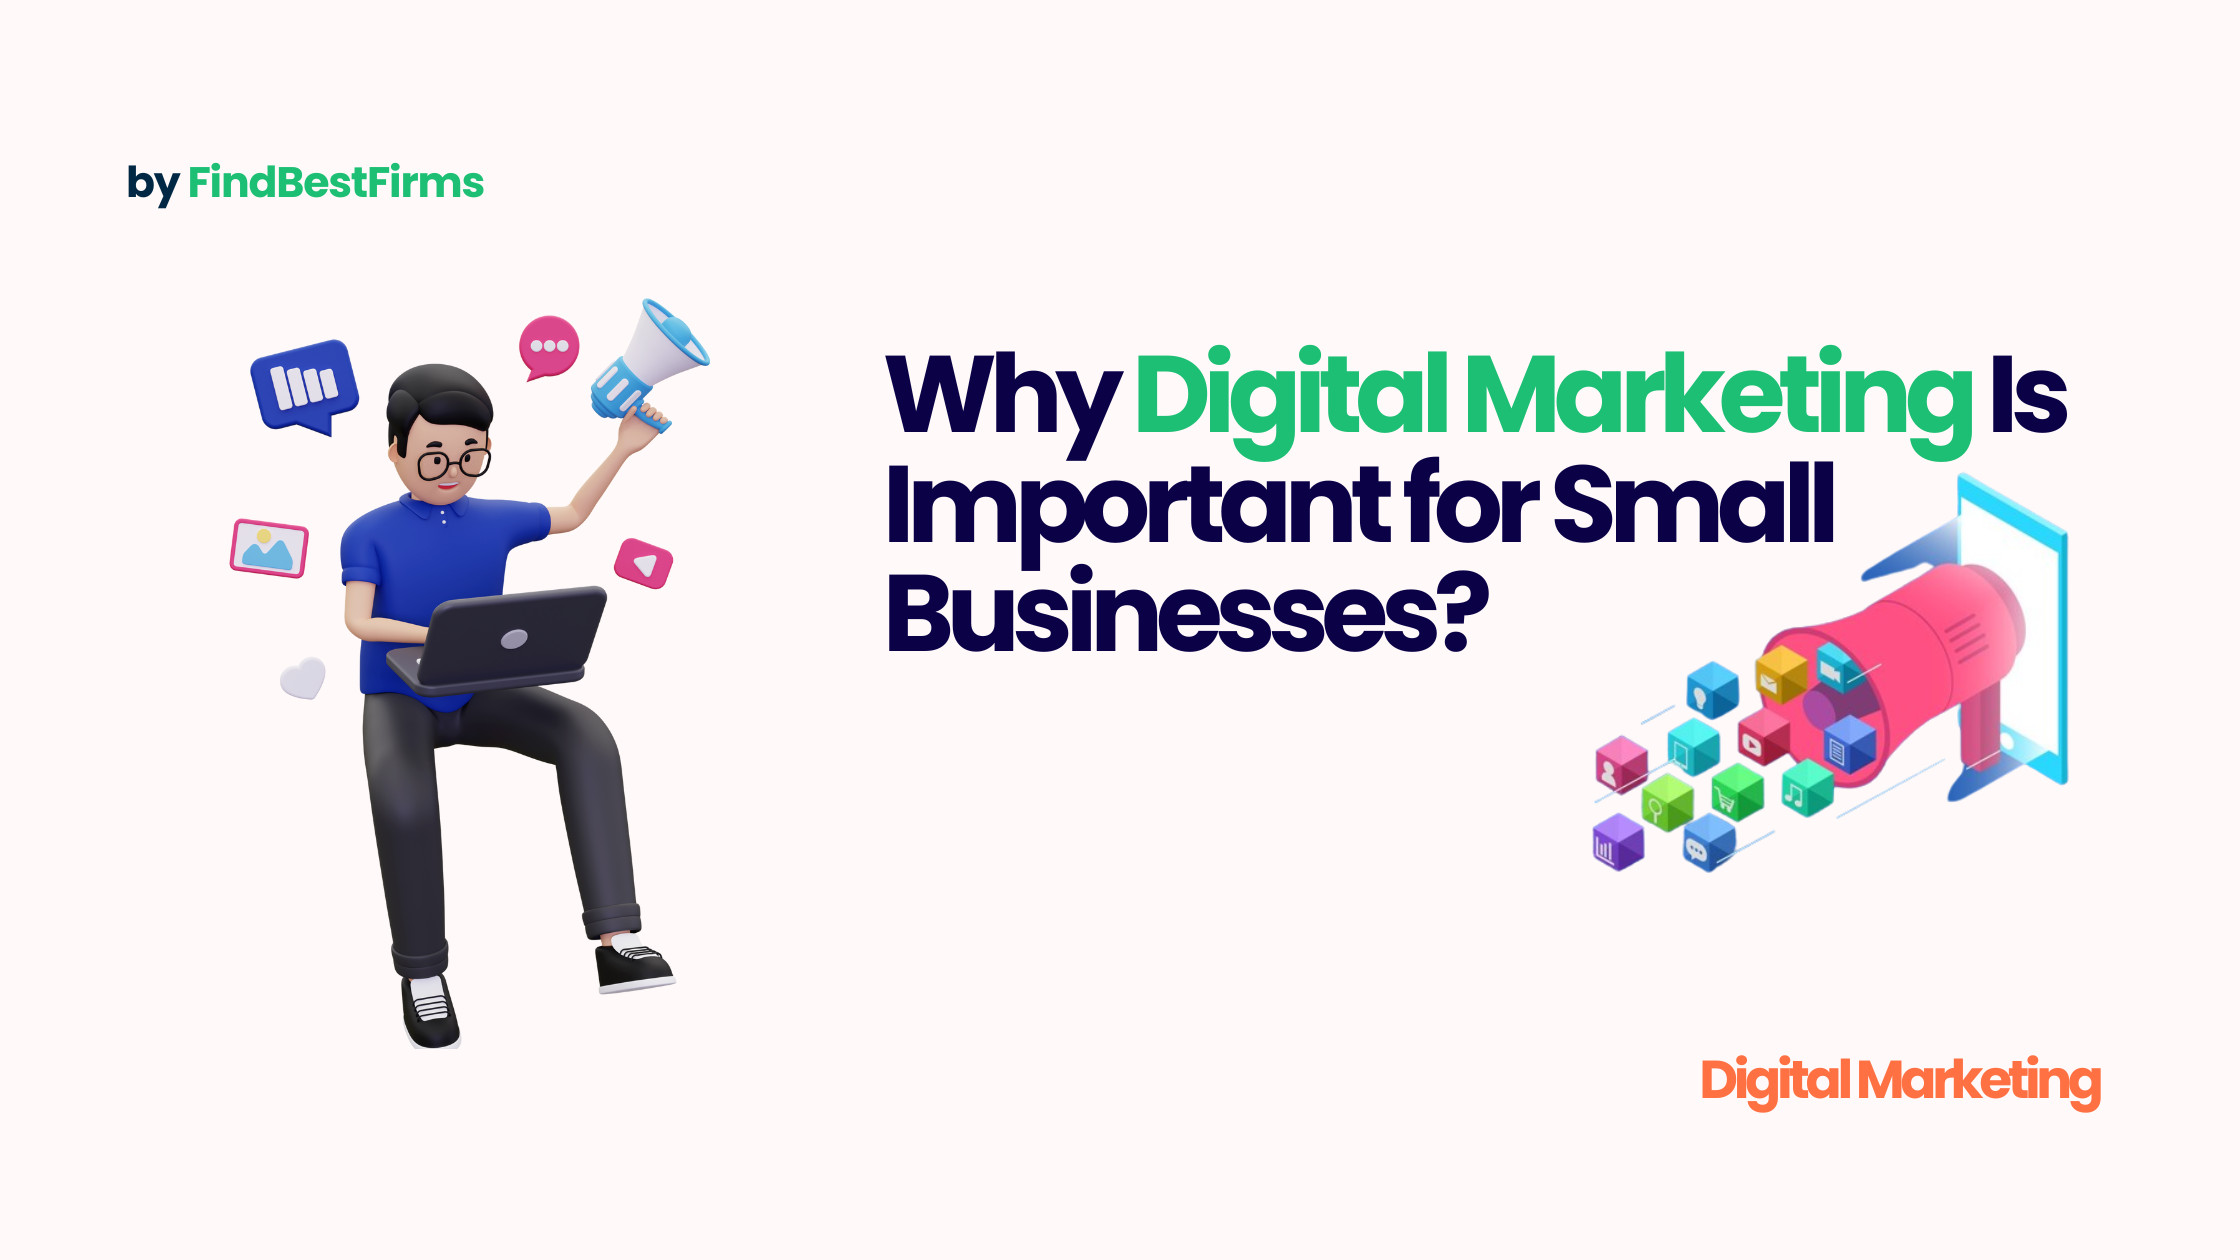 Why Digital Marketing Is Important for Small Businesses (1)